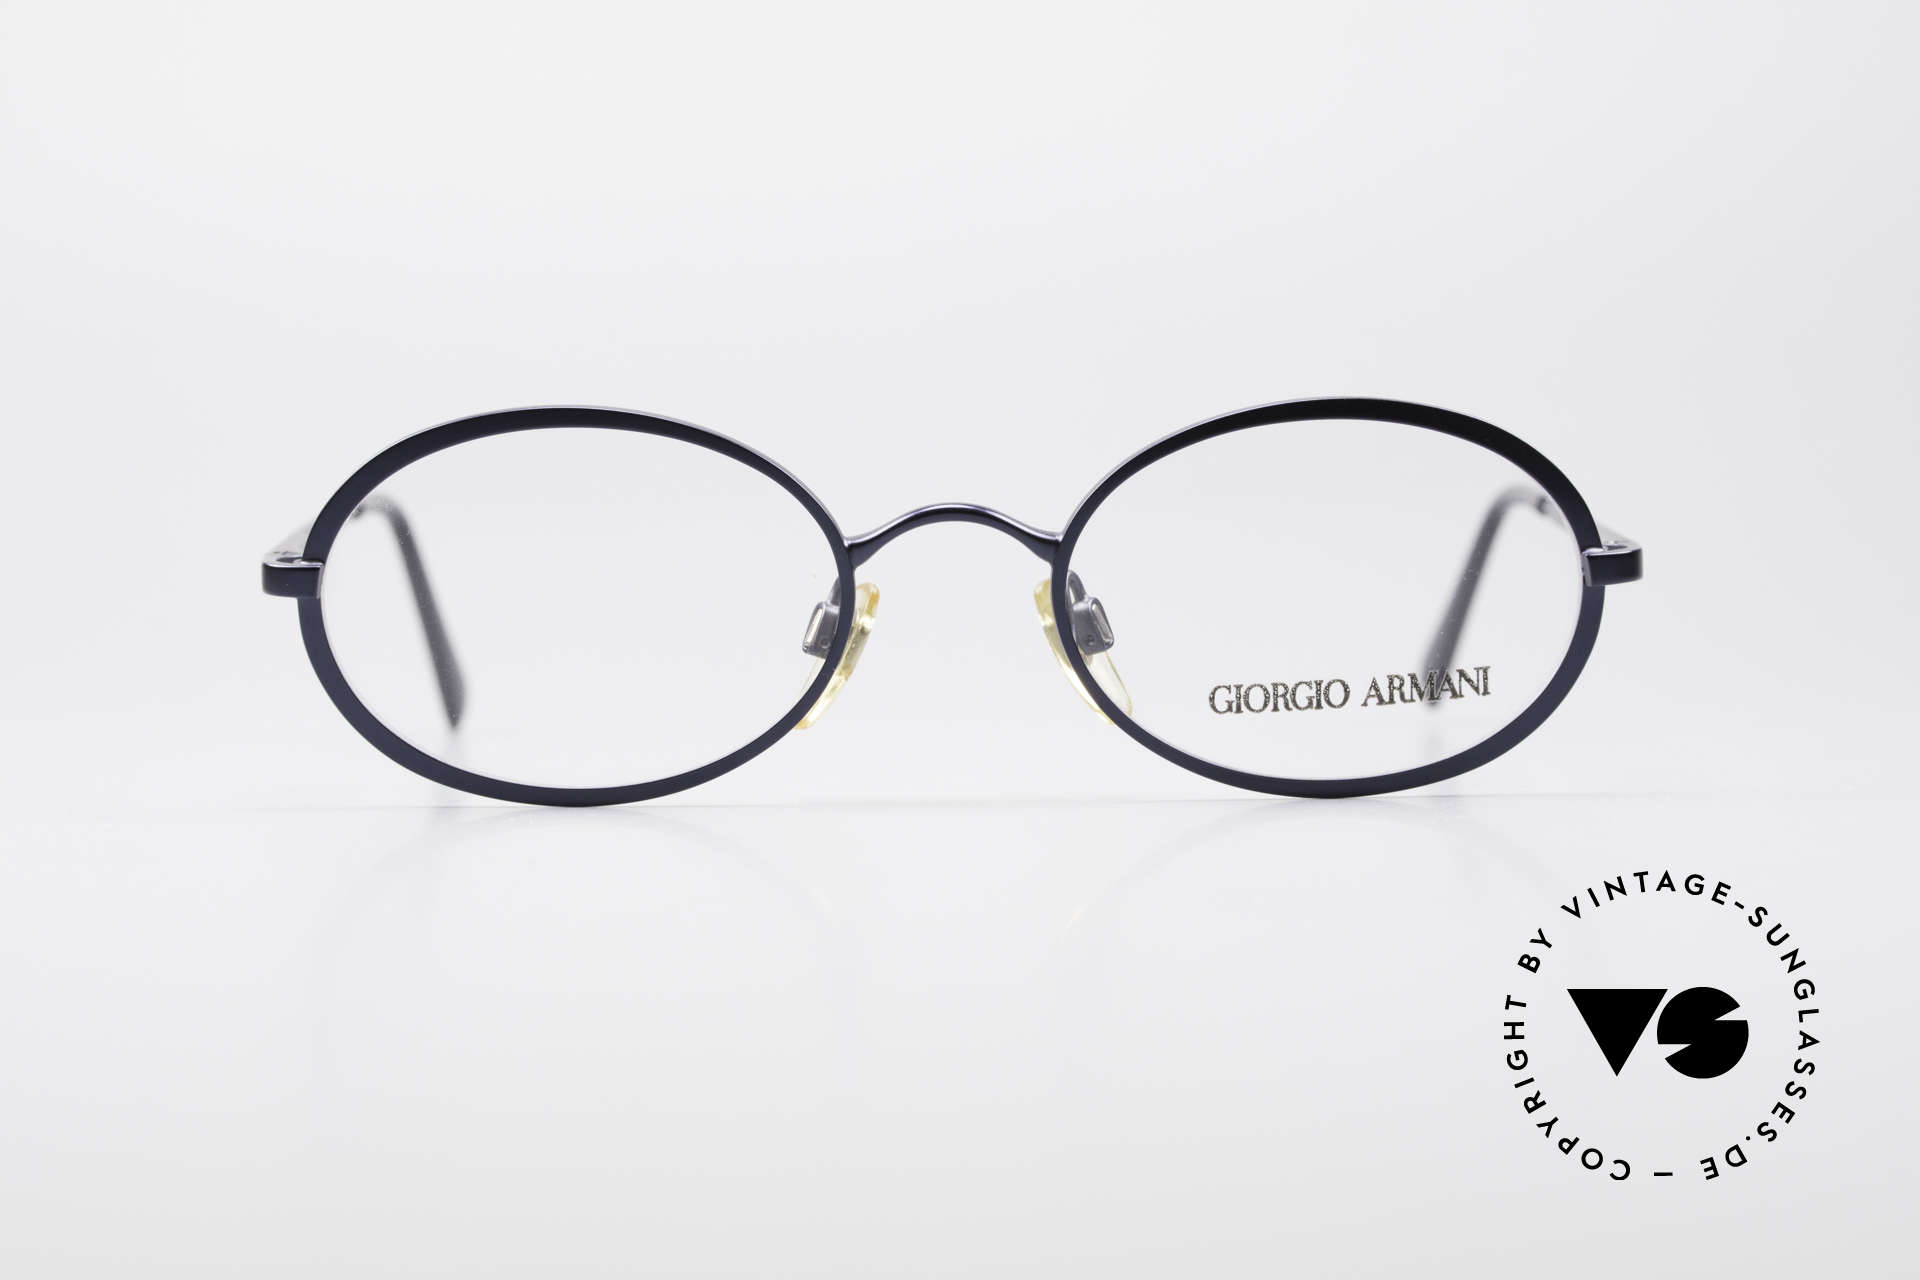 Giorgio Armani 277 90's Oval Vintage Eyeglasses, sober, timeless style: suitable for many occasions, Made for Men and Women